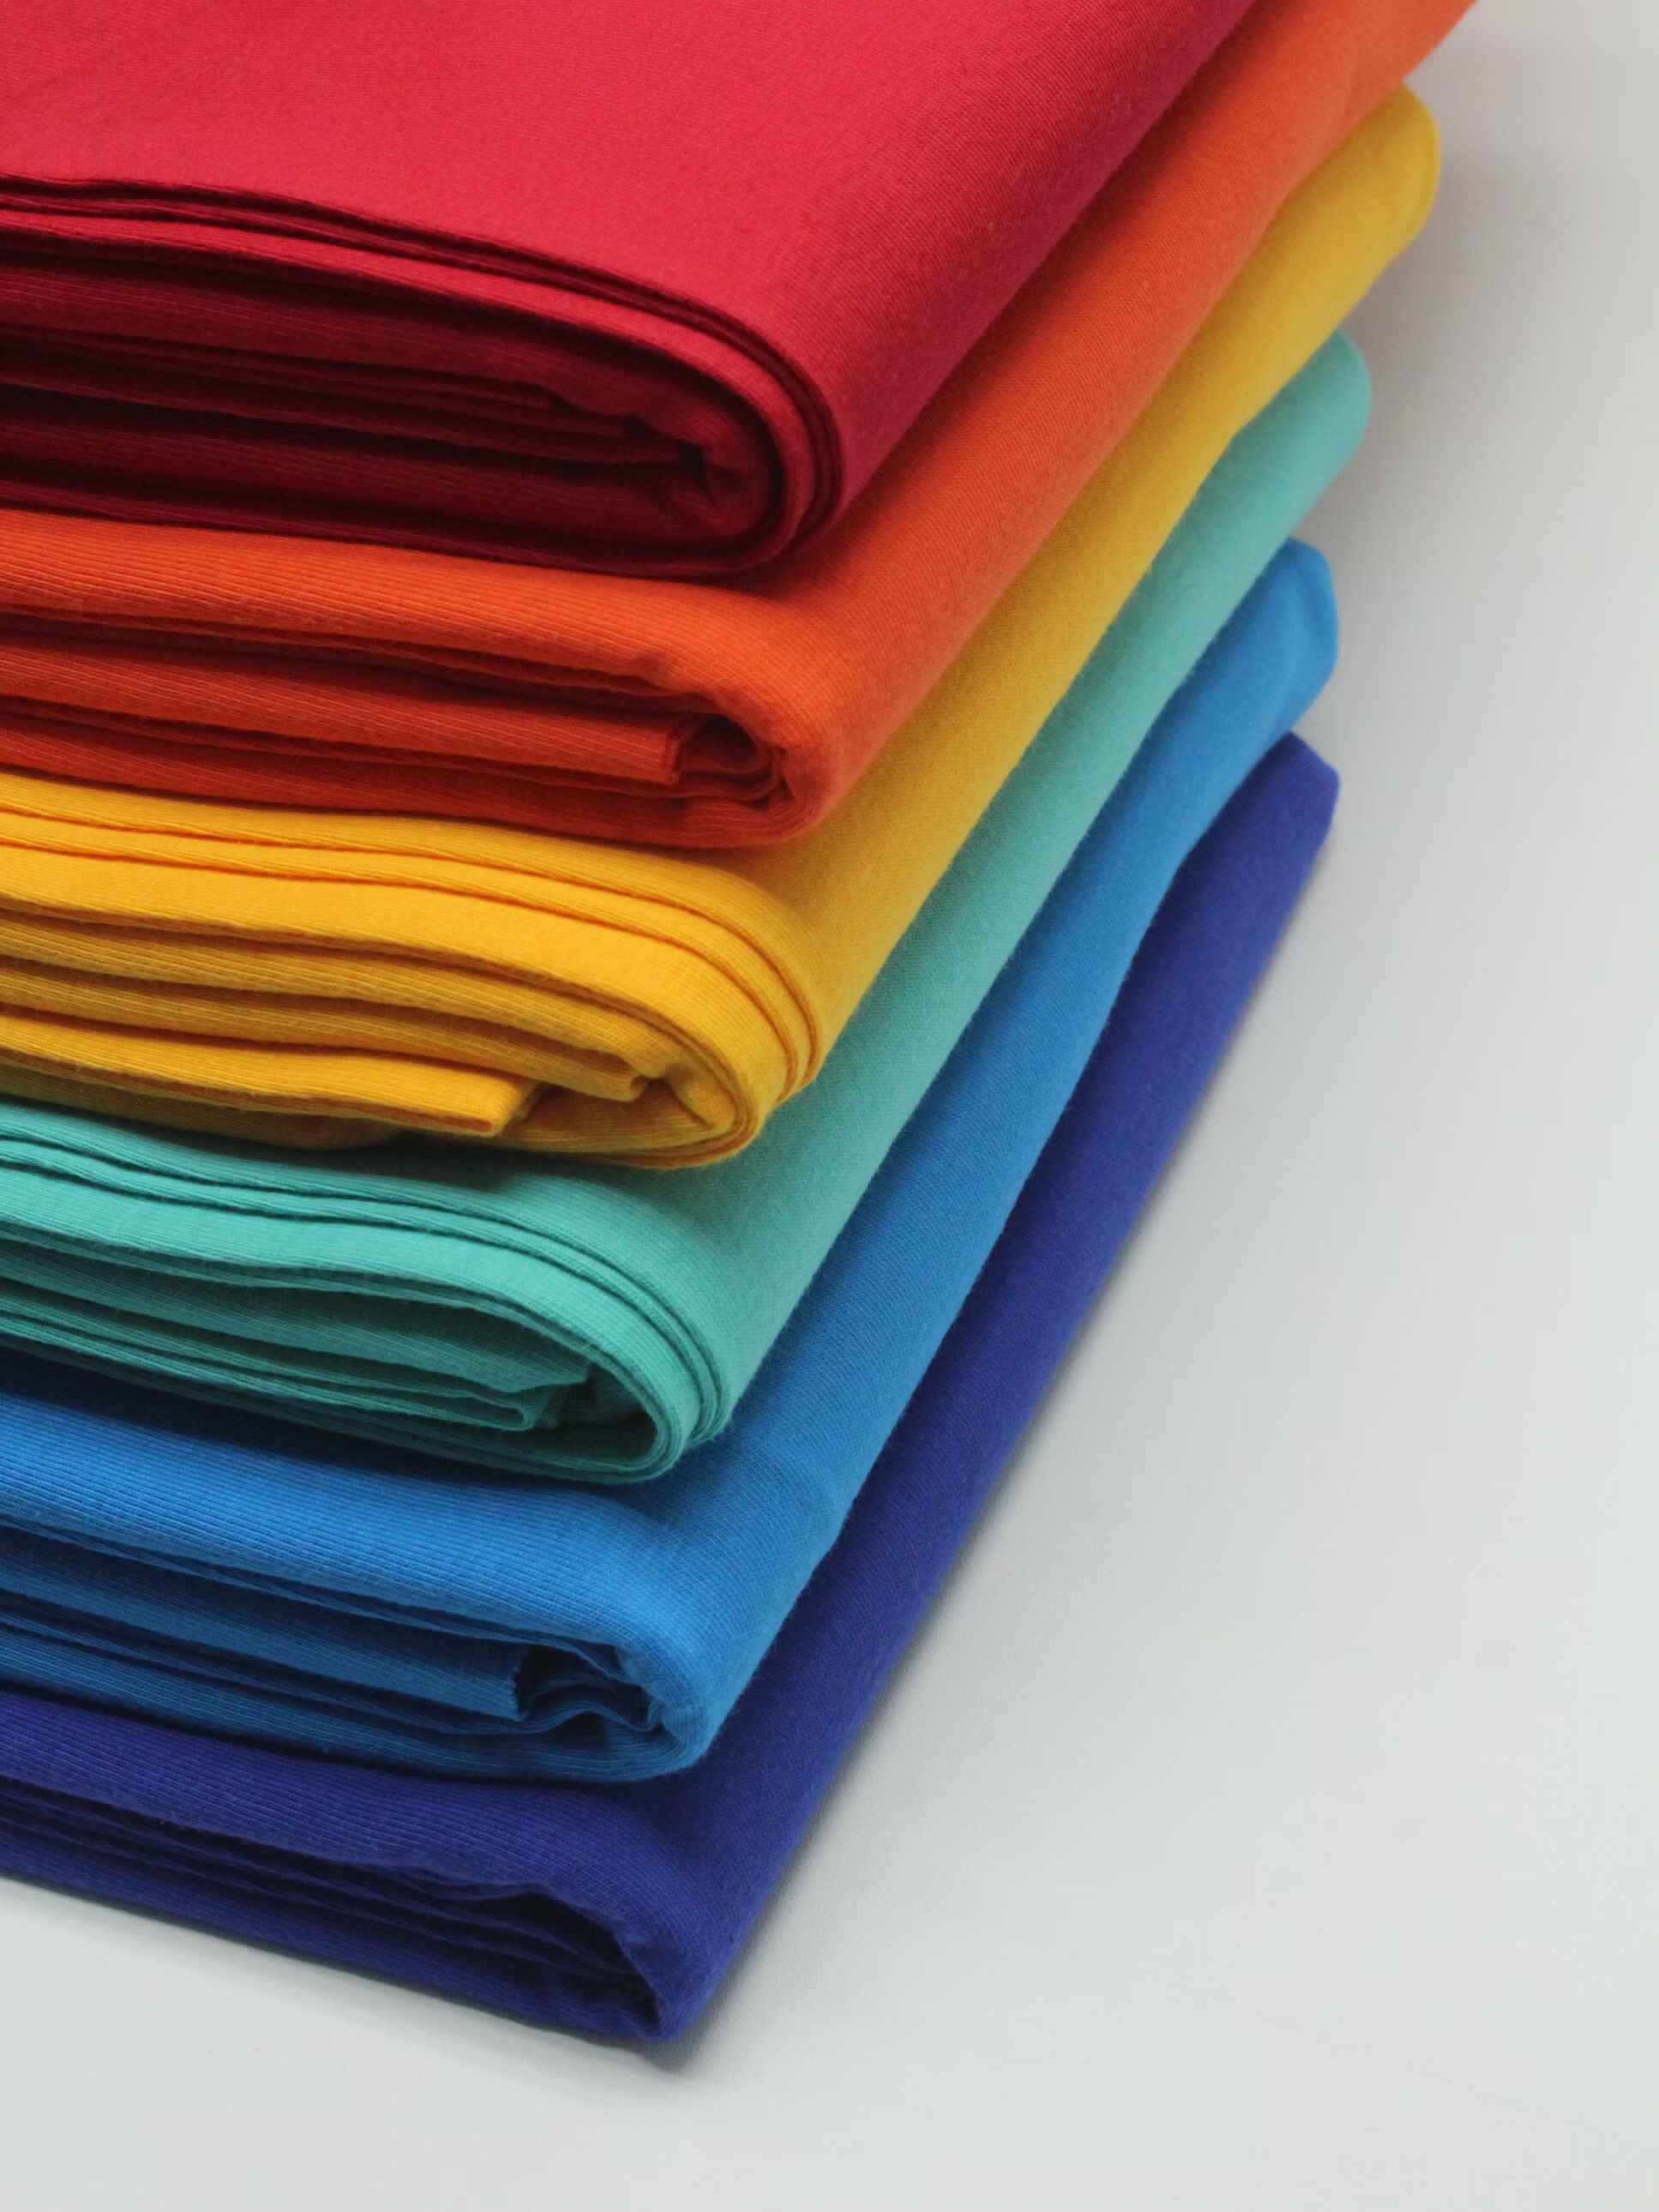 close up of polyester fabrics and polyester fibers